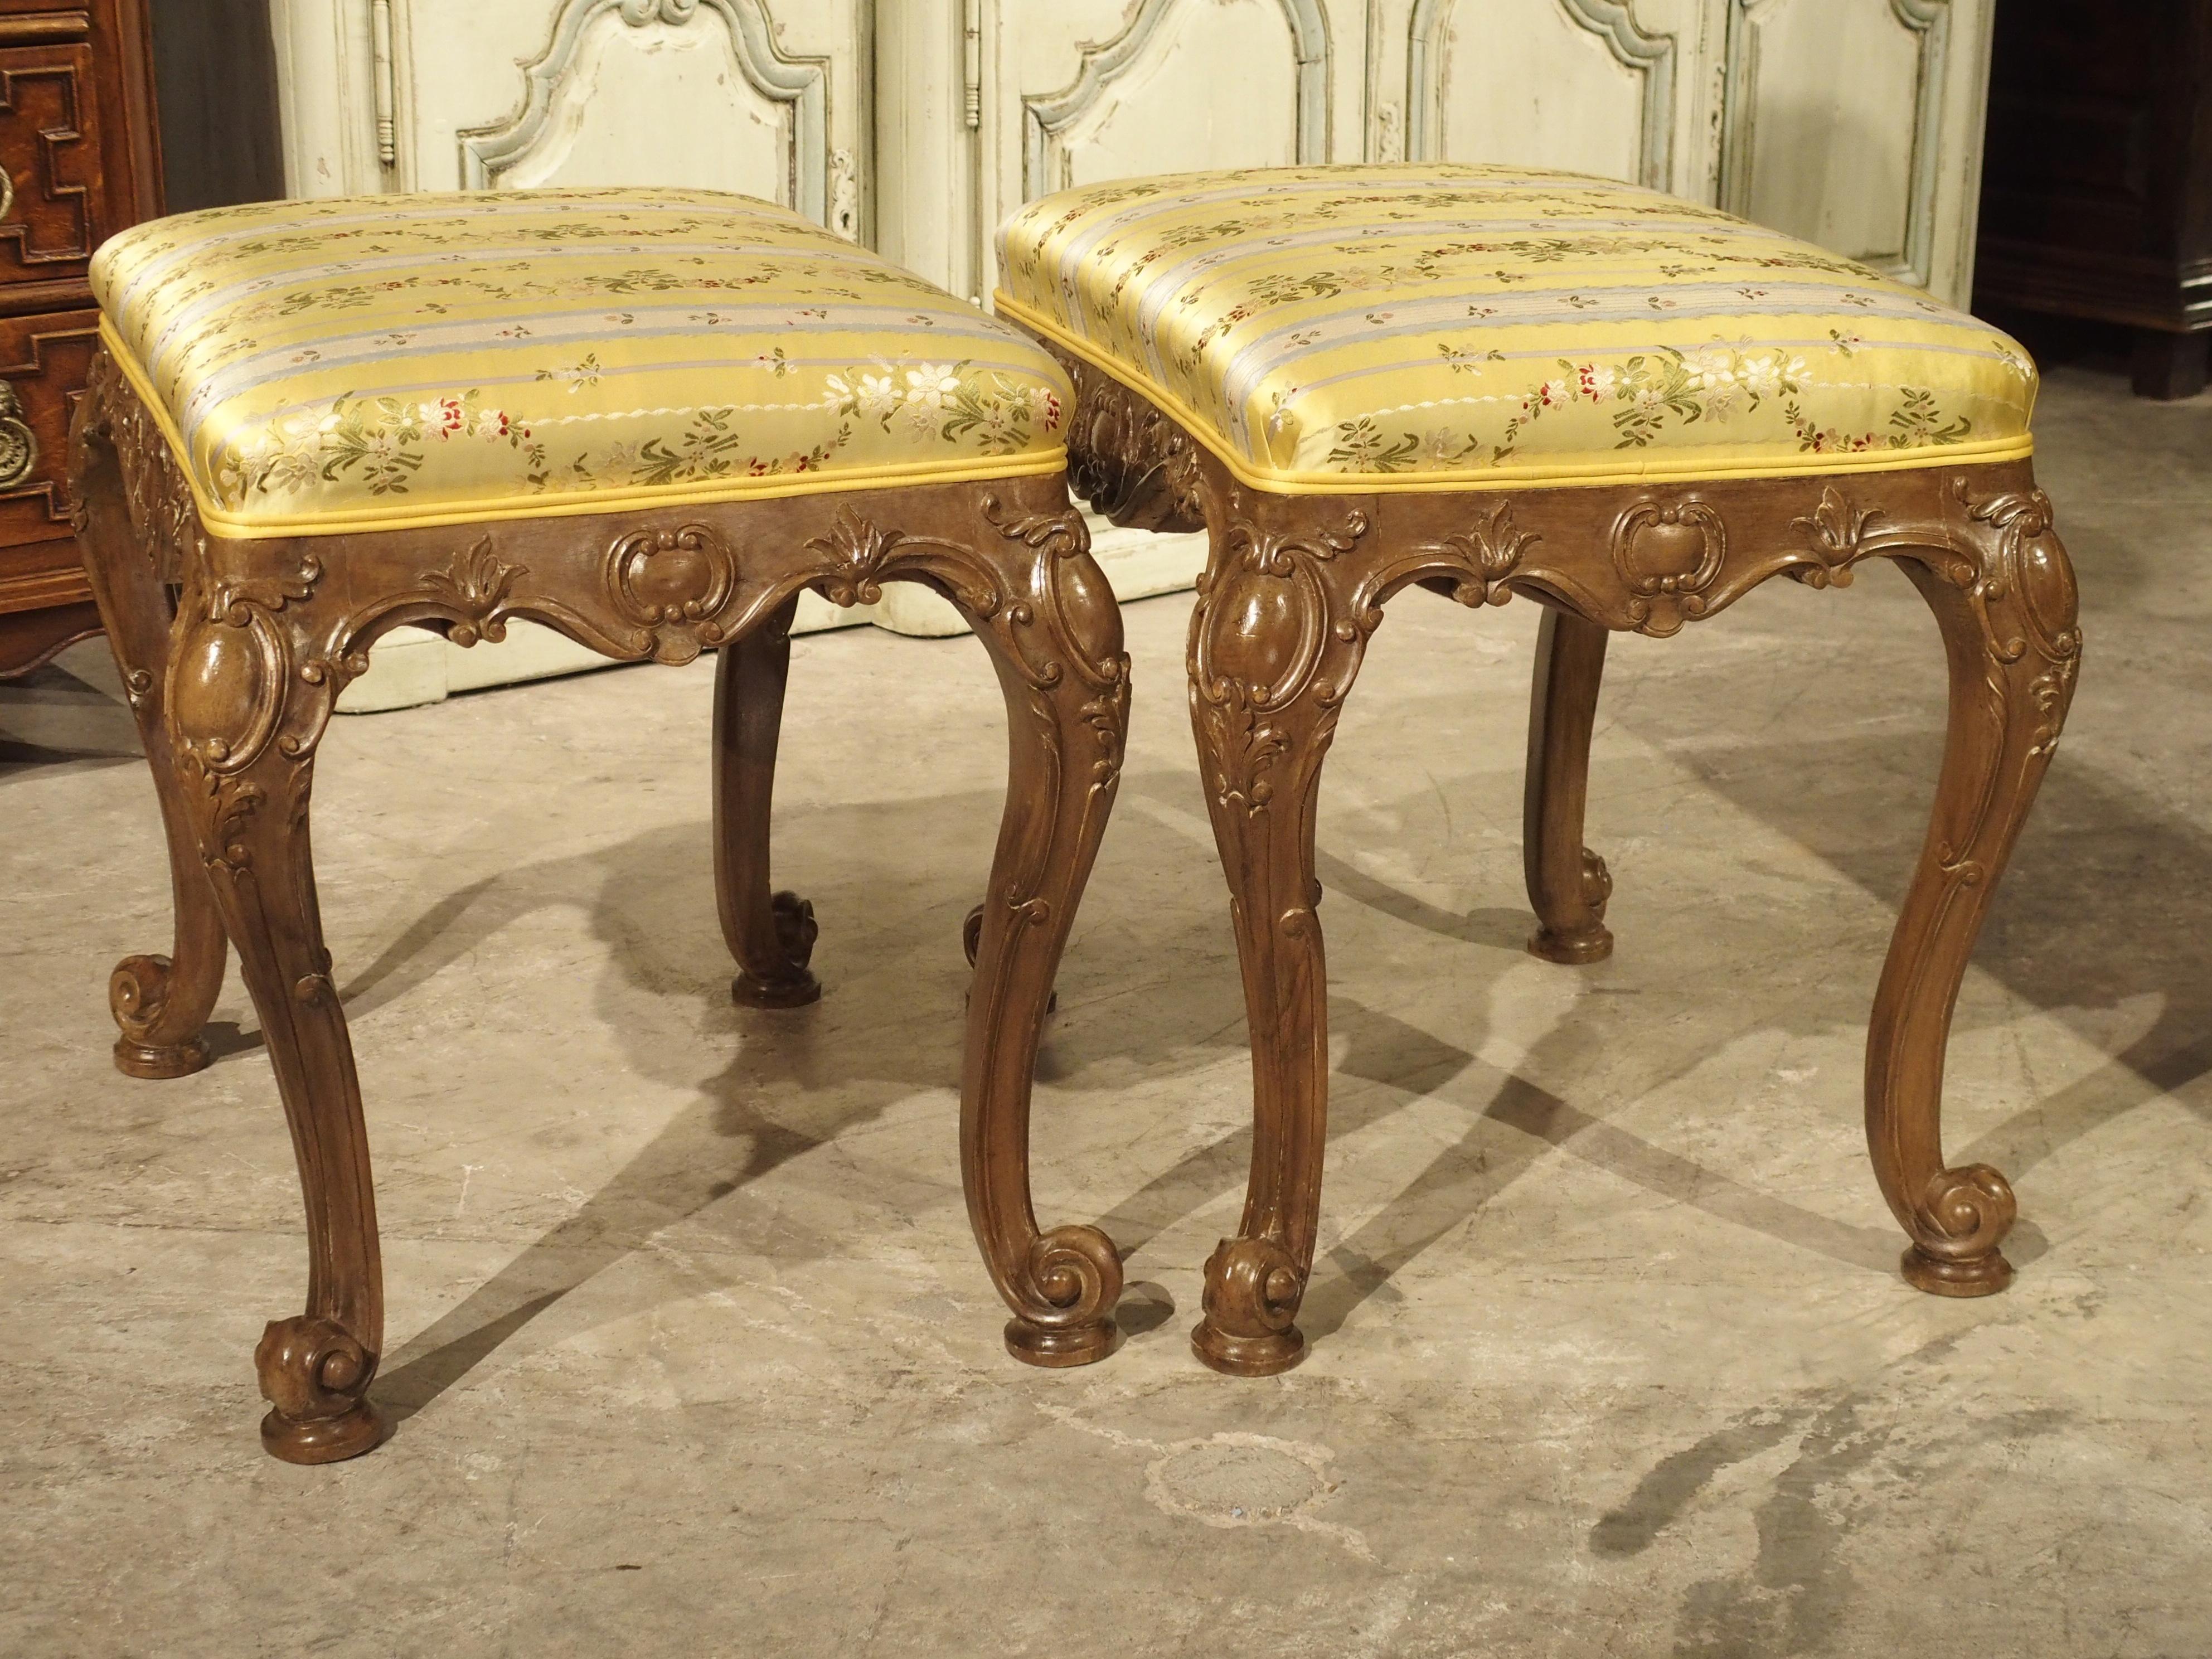 Pair of Well Carved French Louis XV Style Tabouret Stools with Silk Upholstery For Sale 5